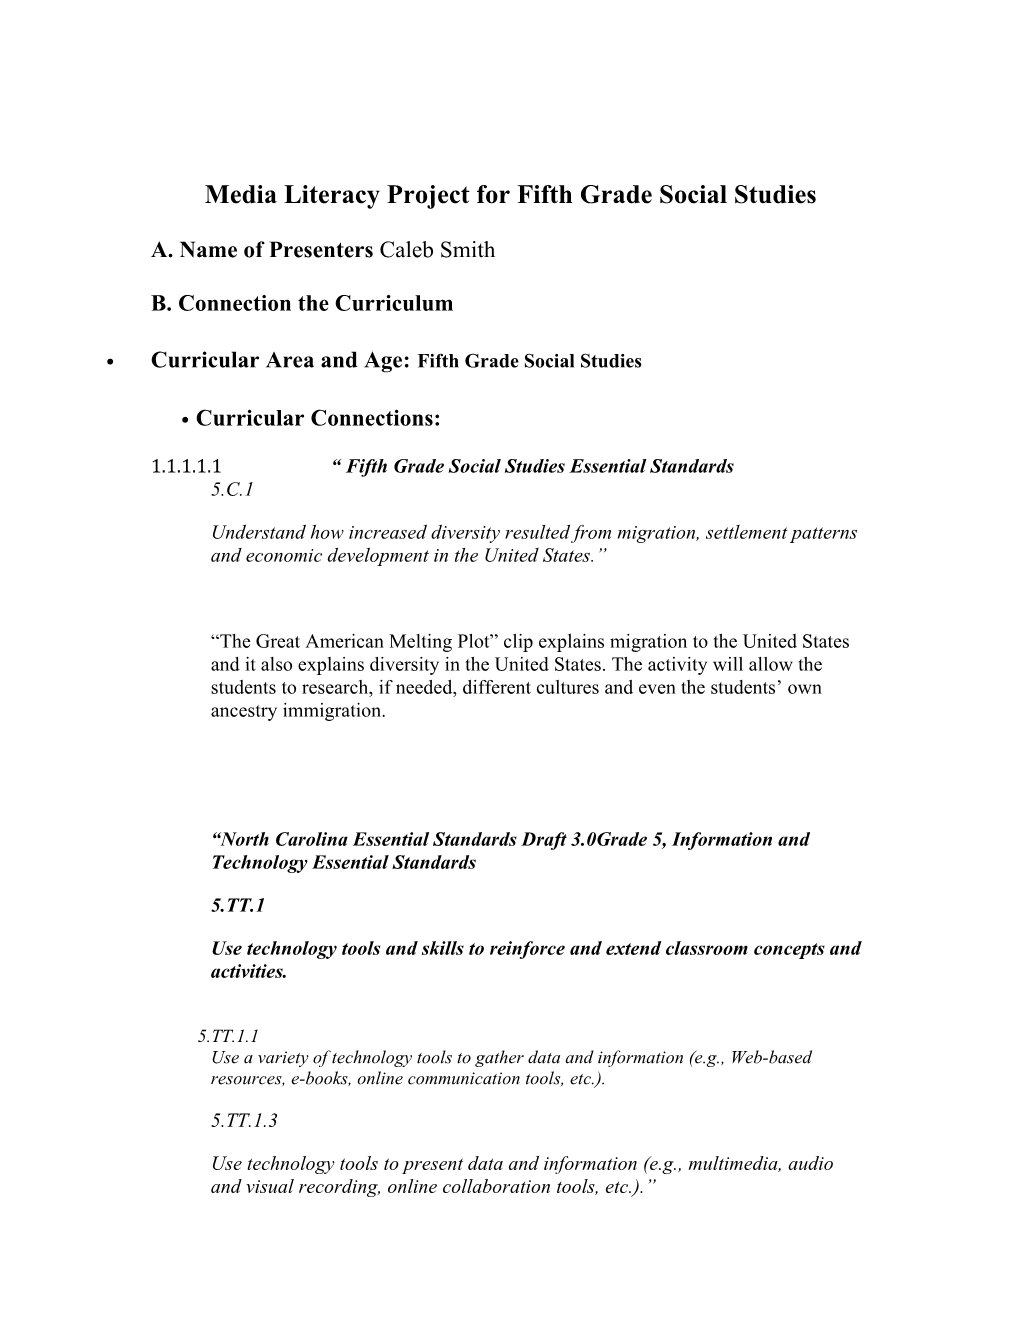 Media Literacy Project for Fifth Grade Social Studies